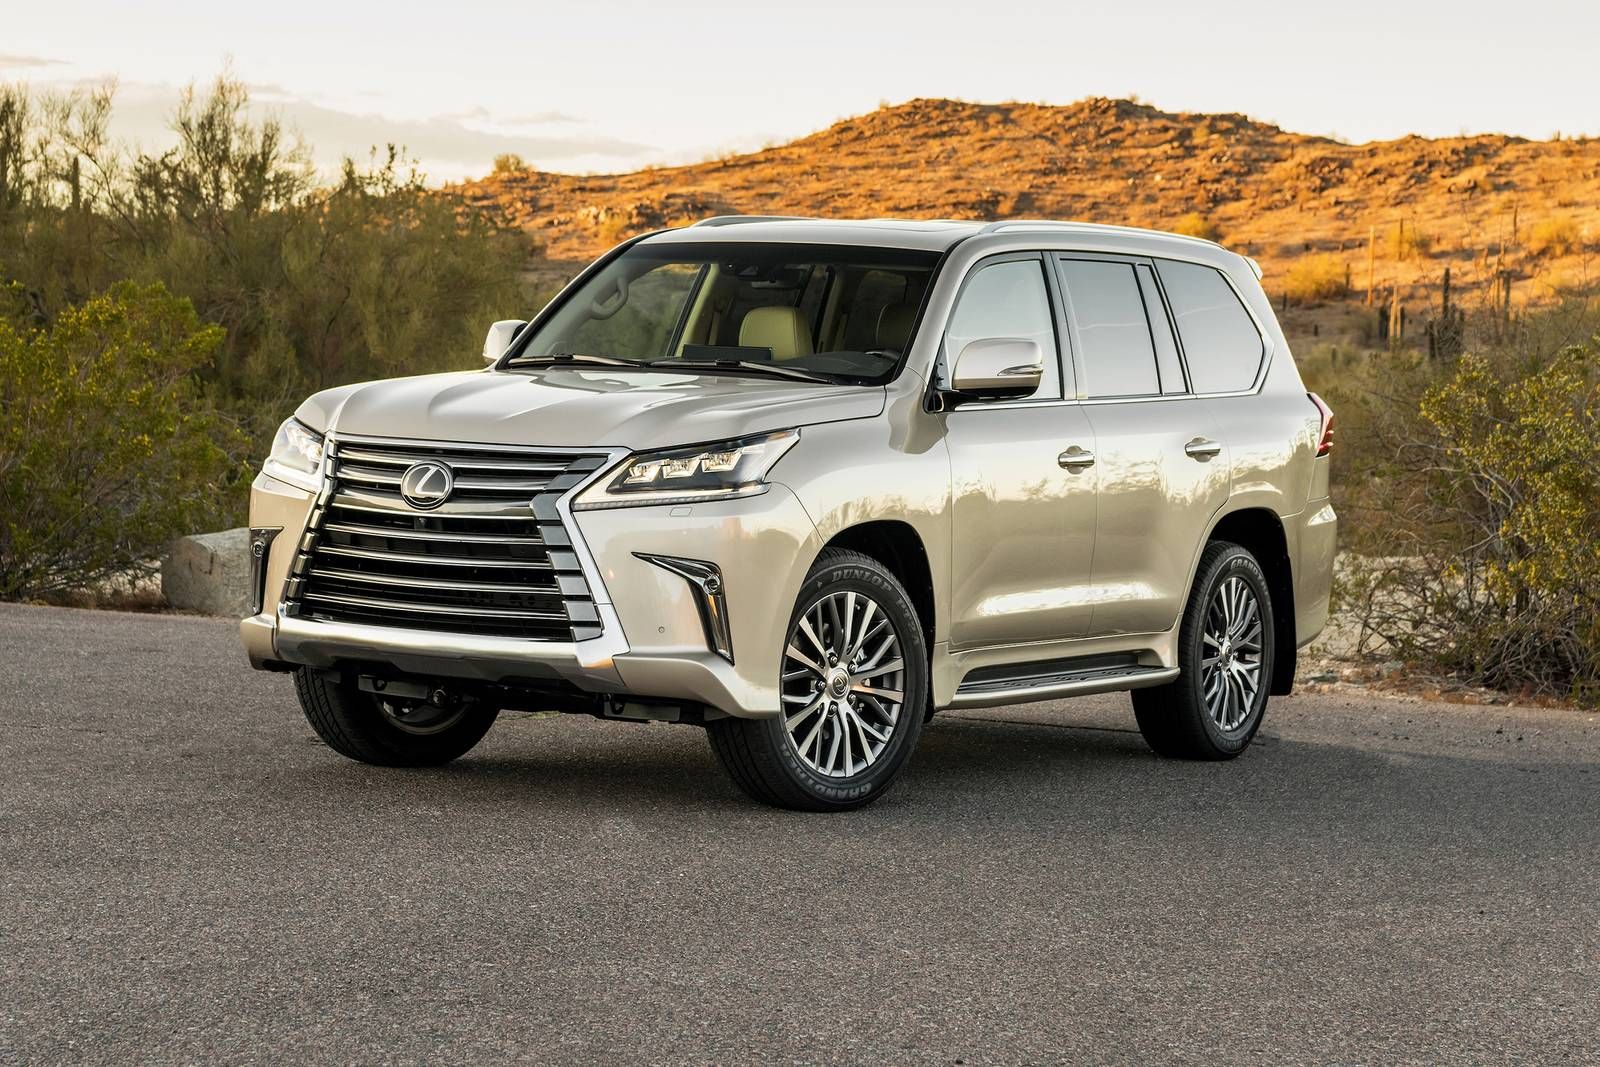 off-white 2021 Lexus LX 570 parked at sunset